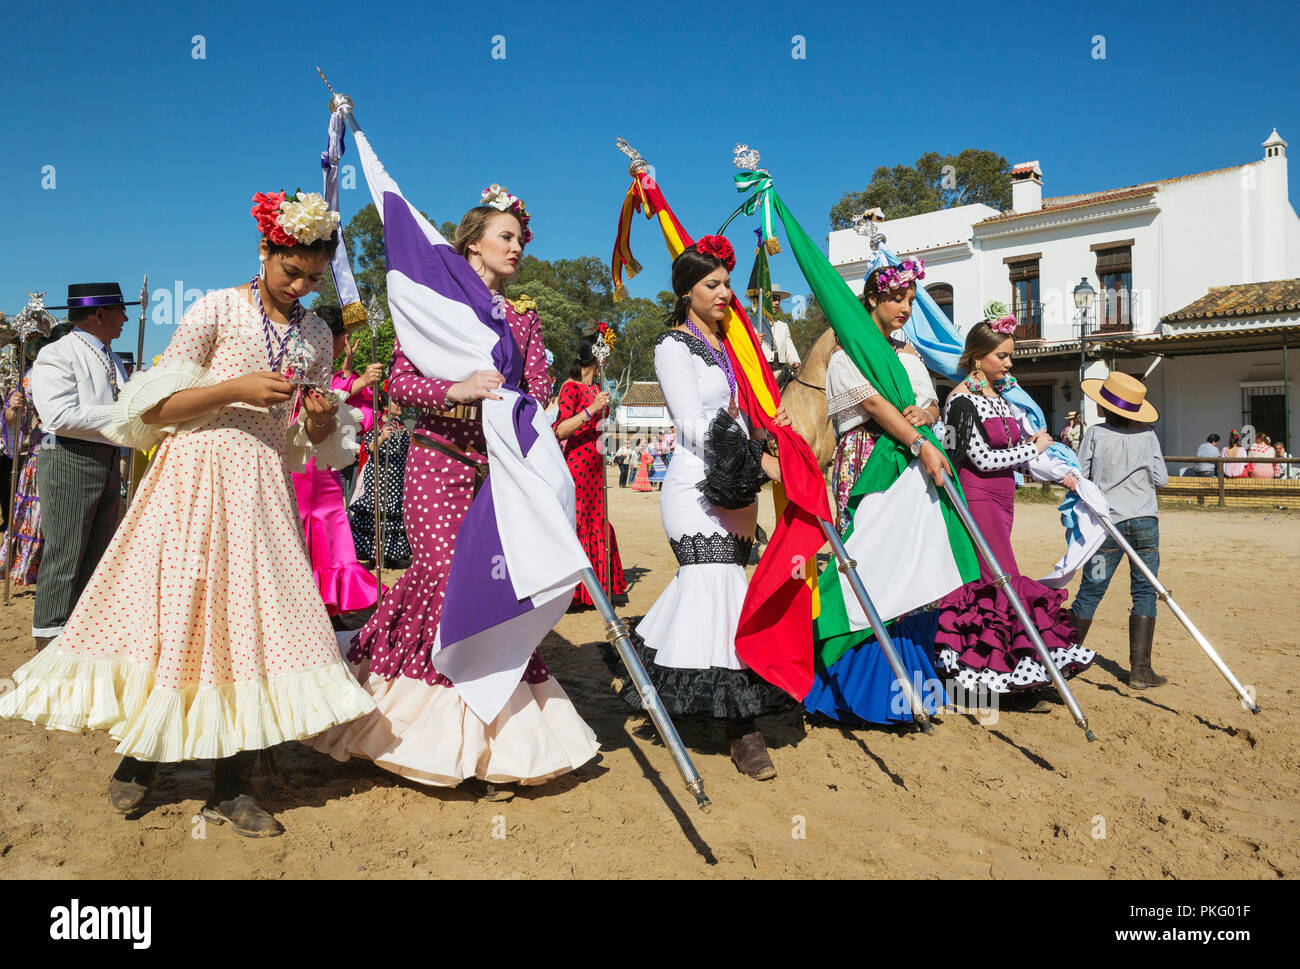 Young women wearing colourful gypsy dresses, Pentecost pilgrimage of El Rocio, Huelva province, Andalusia, Spain Stock Photo